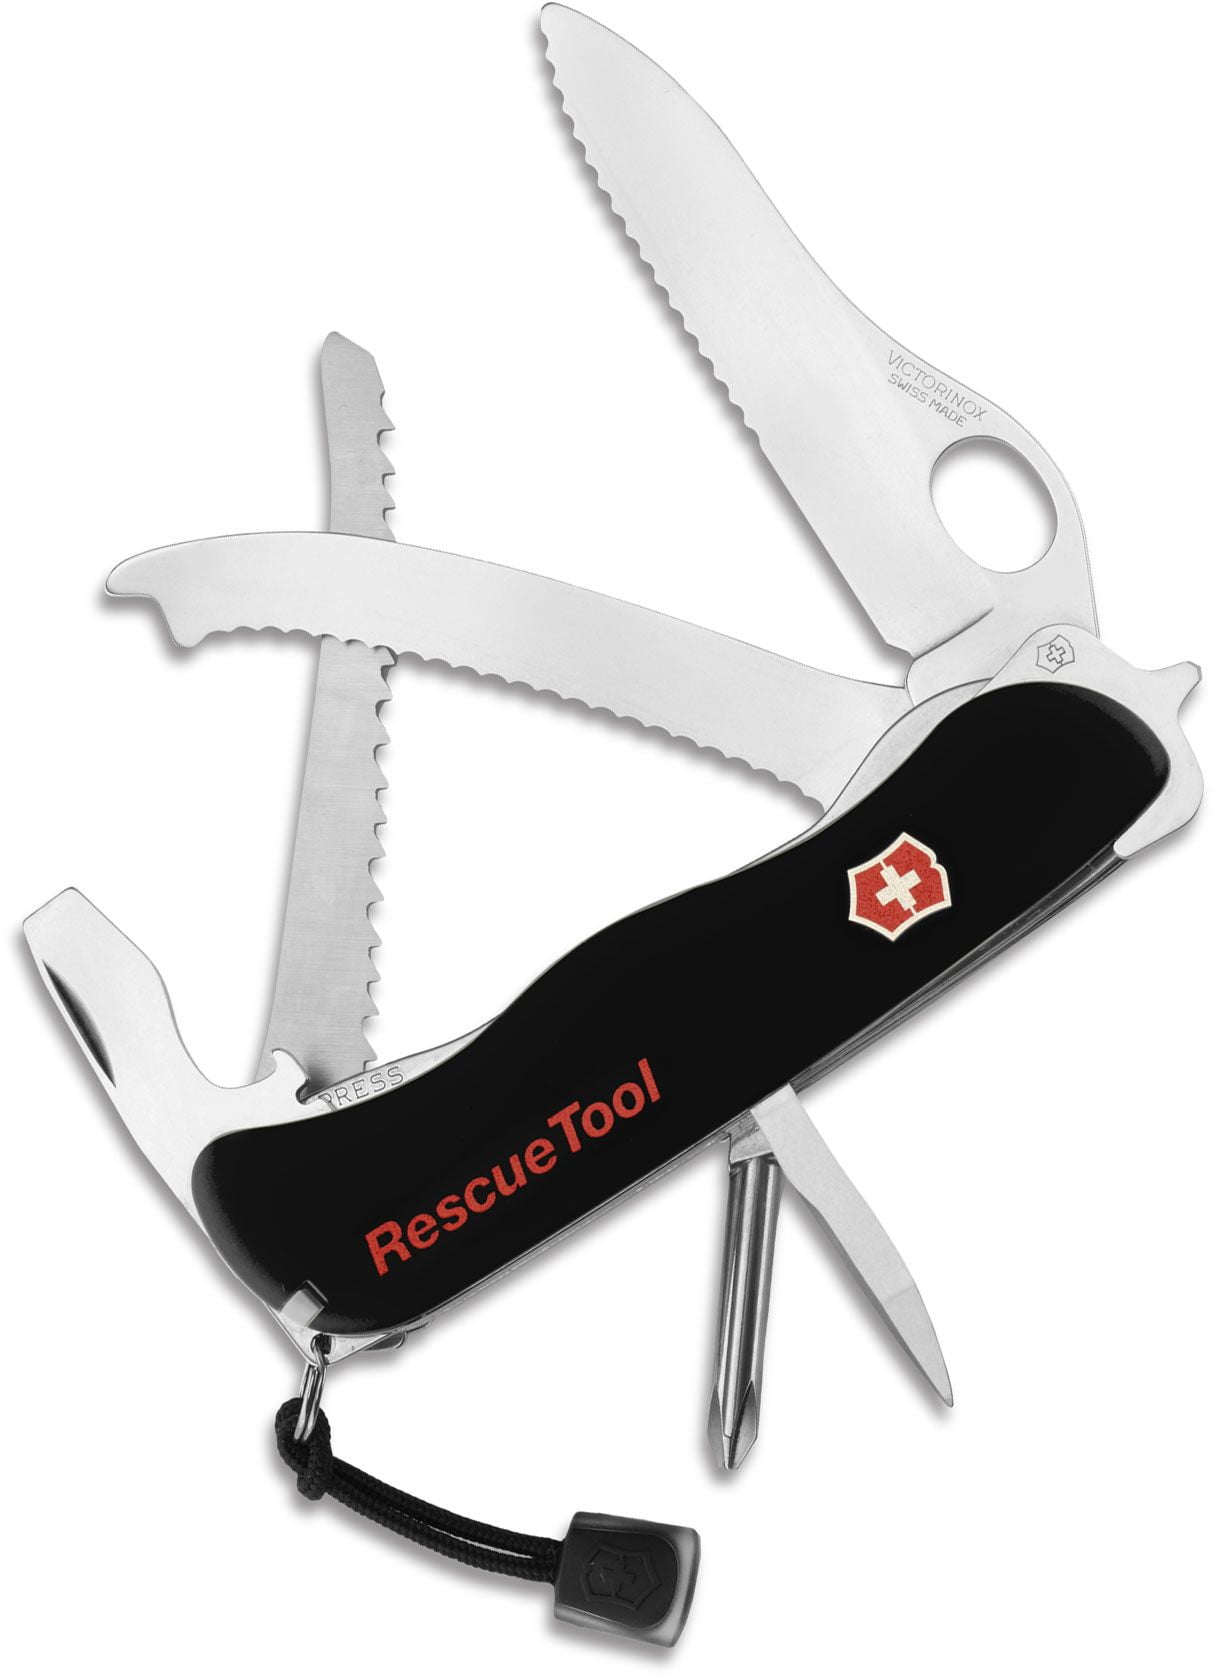 Victorinox Swiss Army Rescue Tool Pocket Knife with Pouch + Pocket Knife  Sharpener + Cleaning Cloth - Top Value Bundle! (Black) 